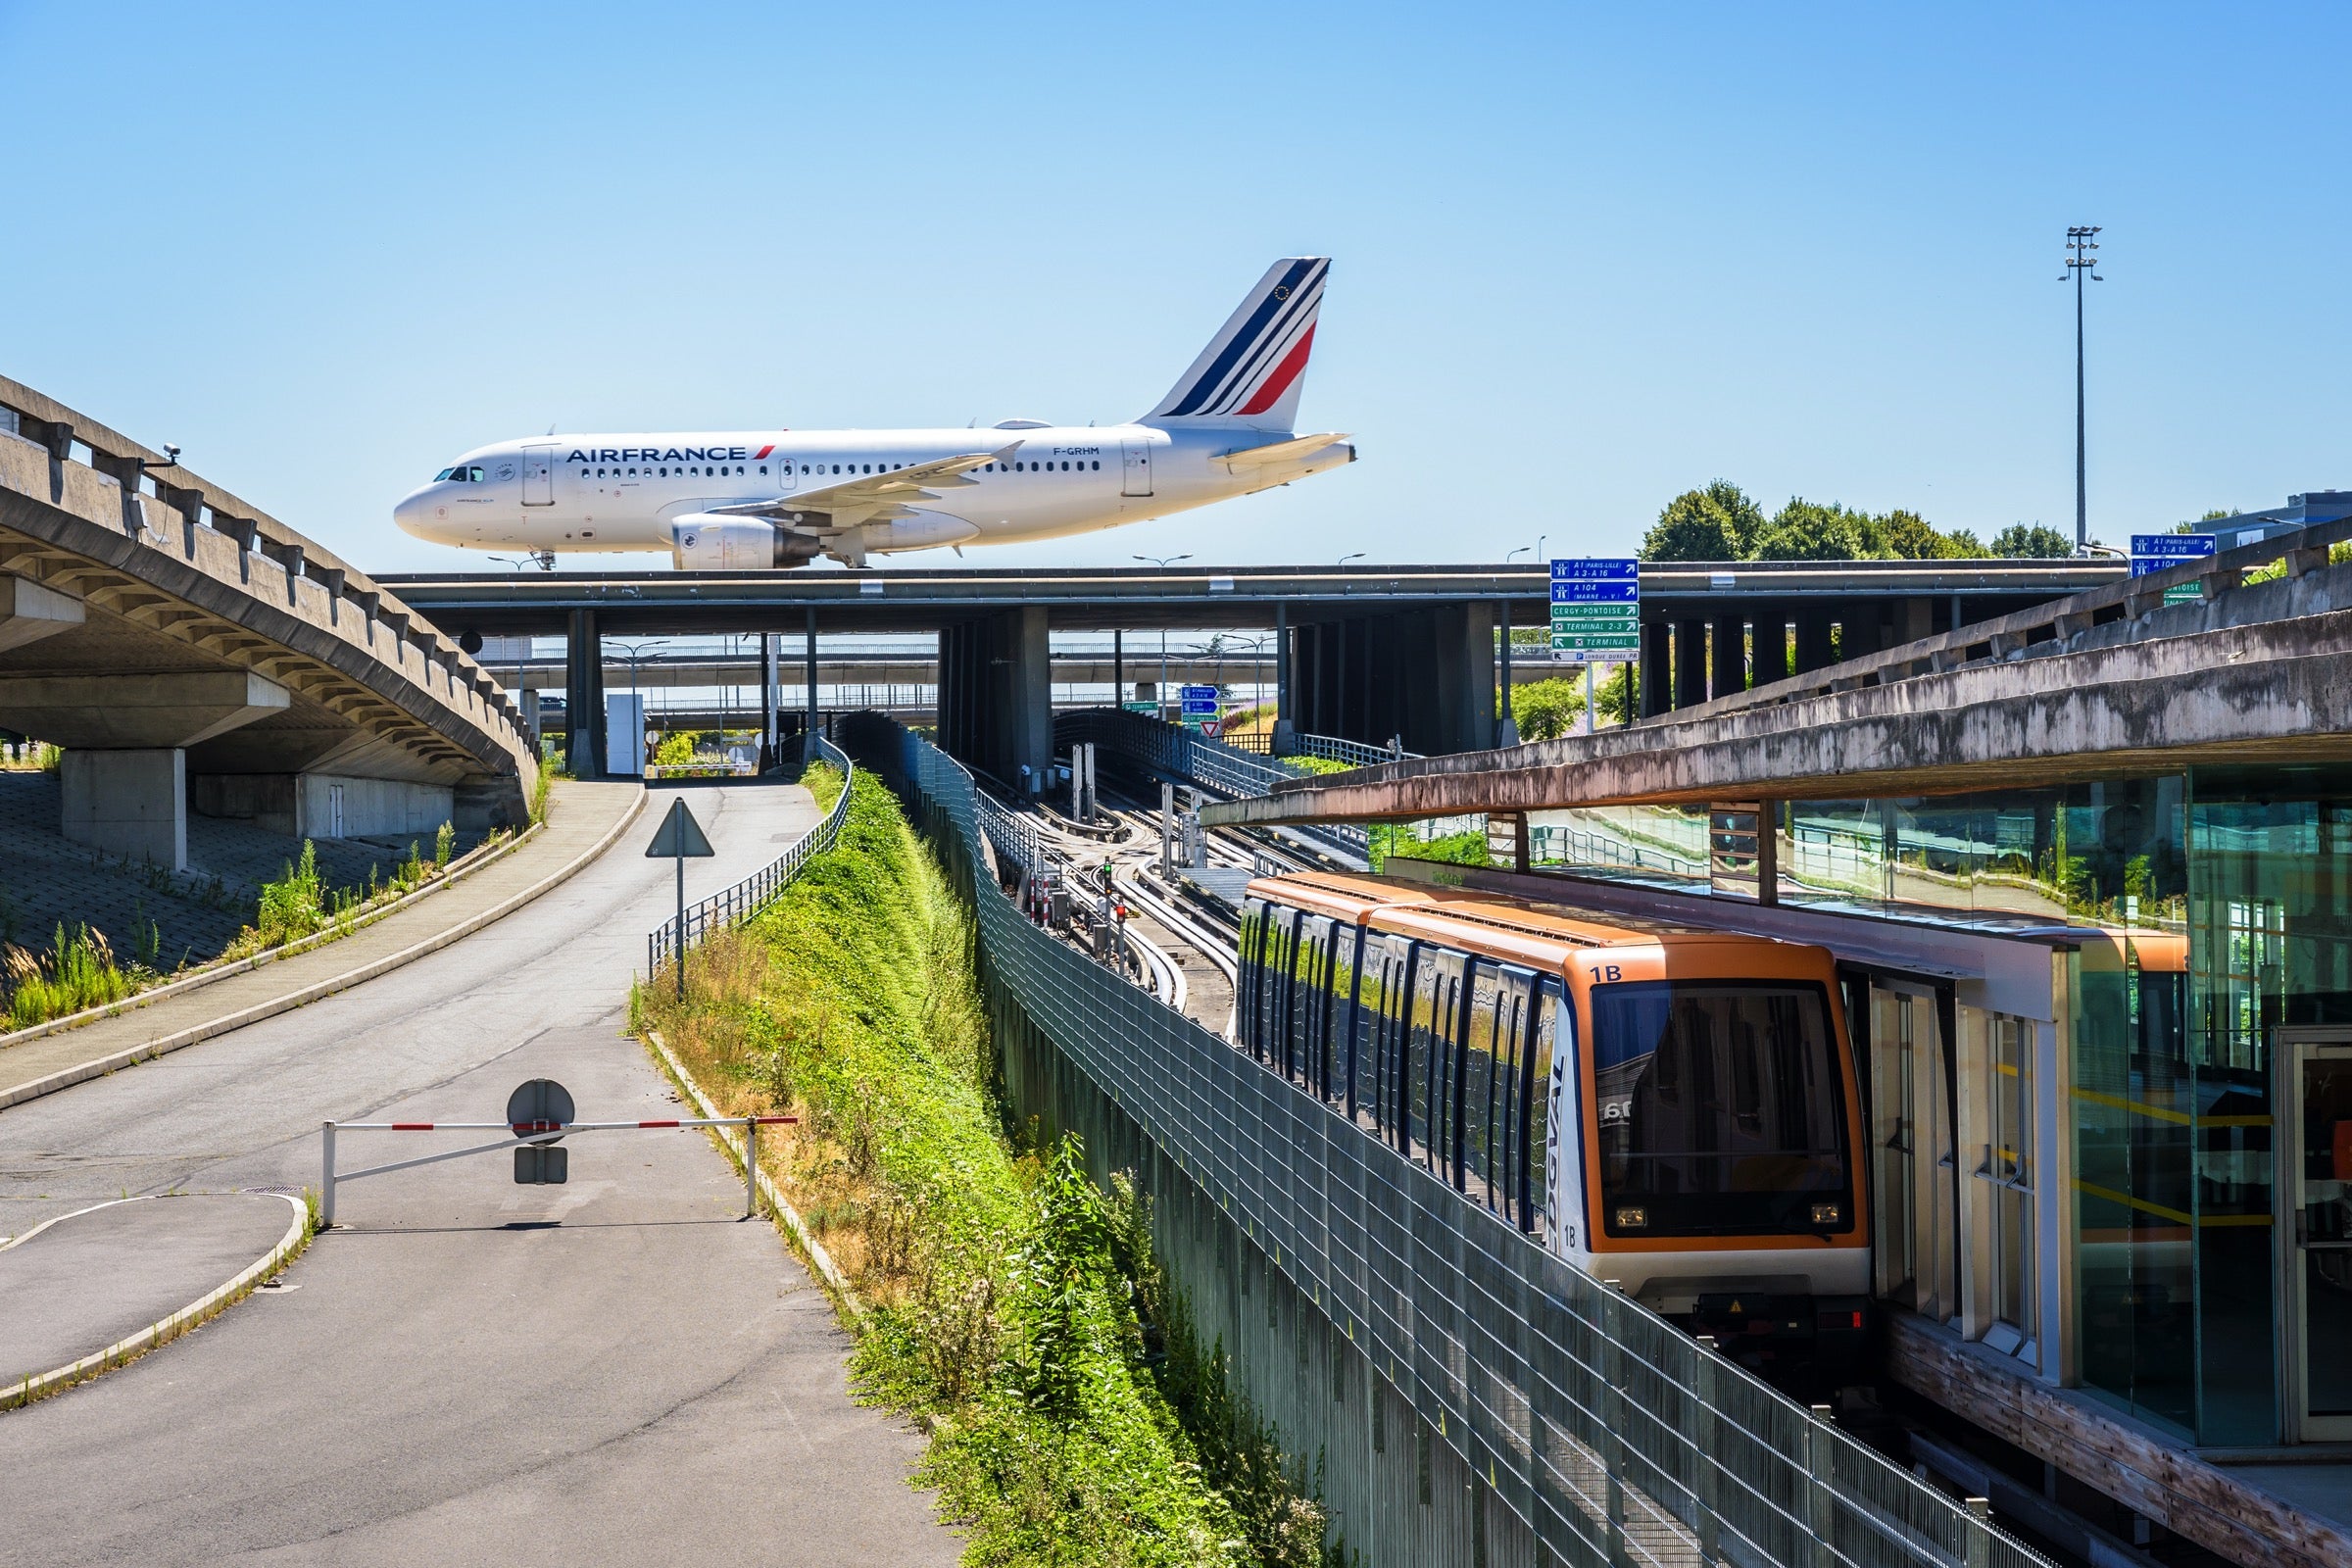 Air France plane and a train at CDG airport